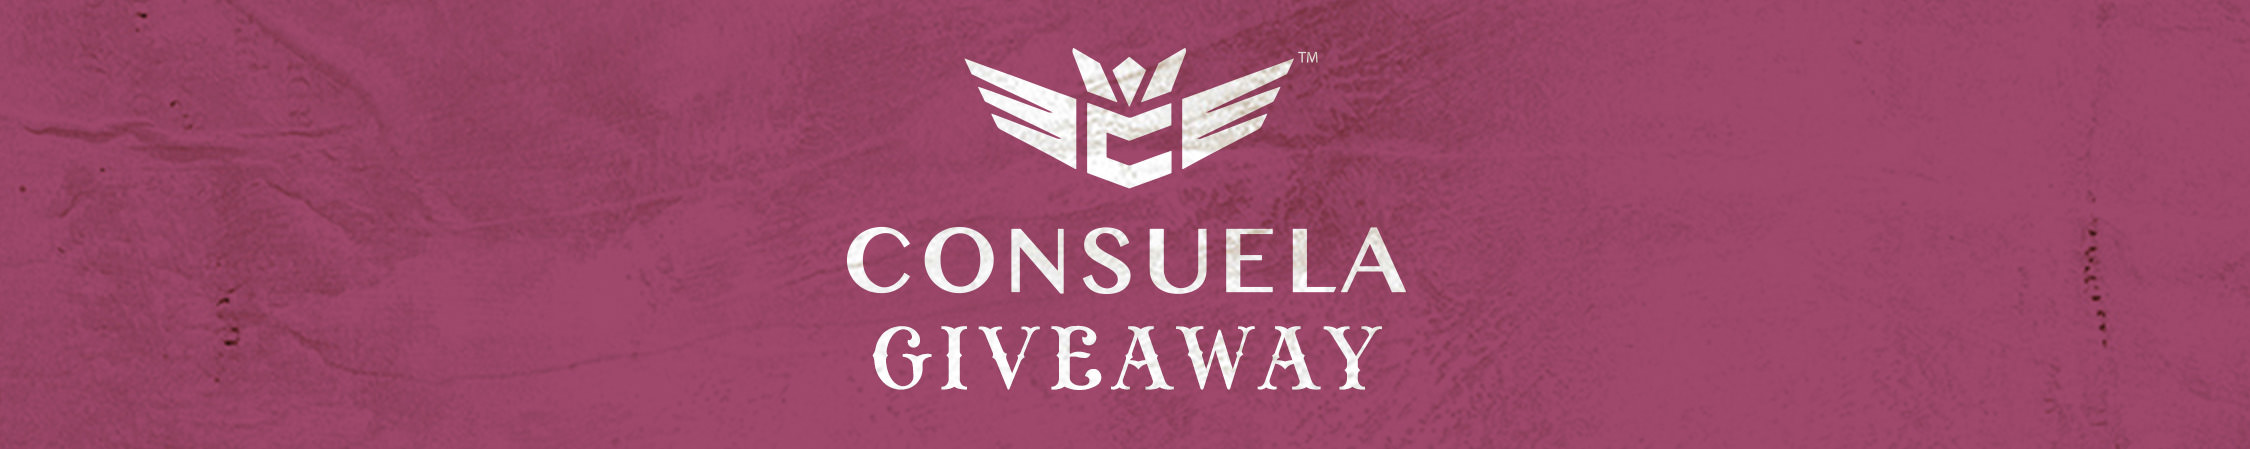 Enter the Consuela Summer Giveaway July 6 - 17, 2022